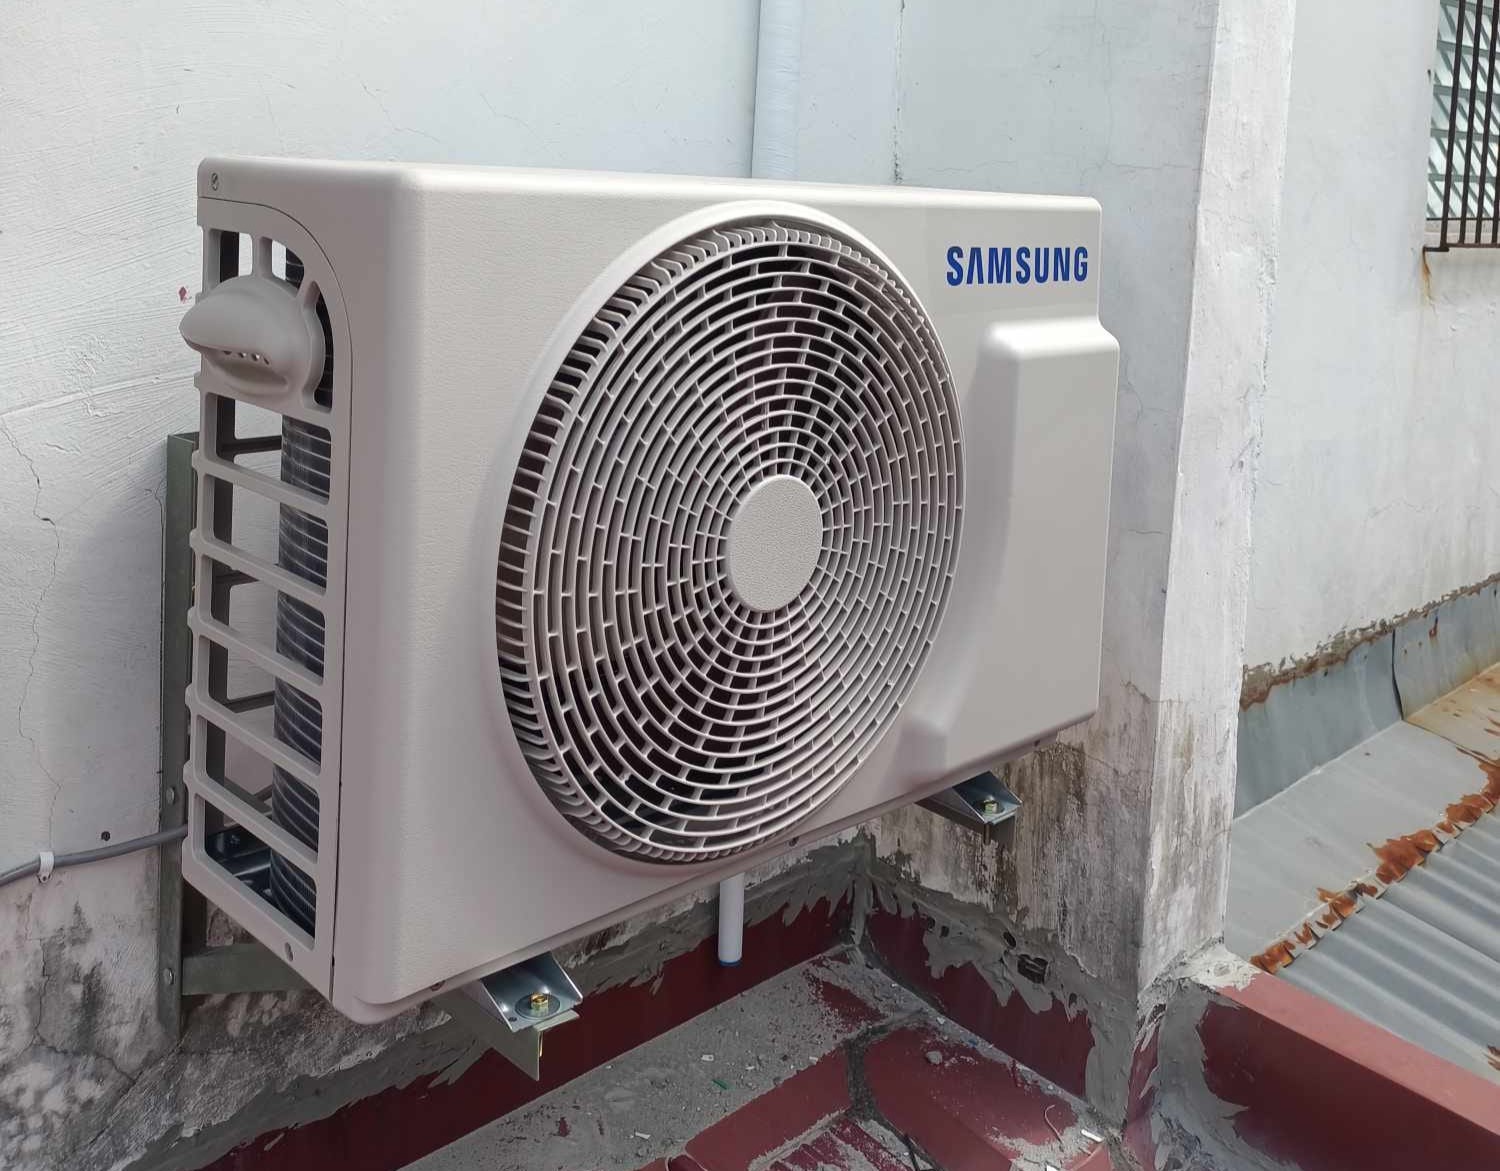 How To Fix The Error Code E237 For Samsung Air Conditioner